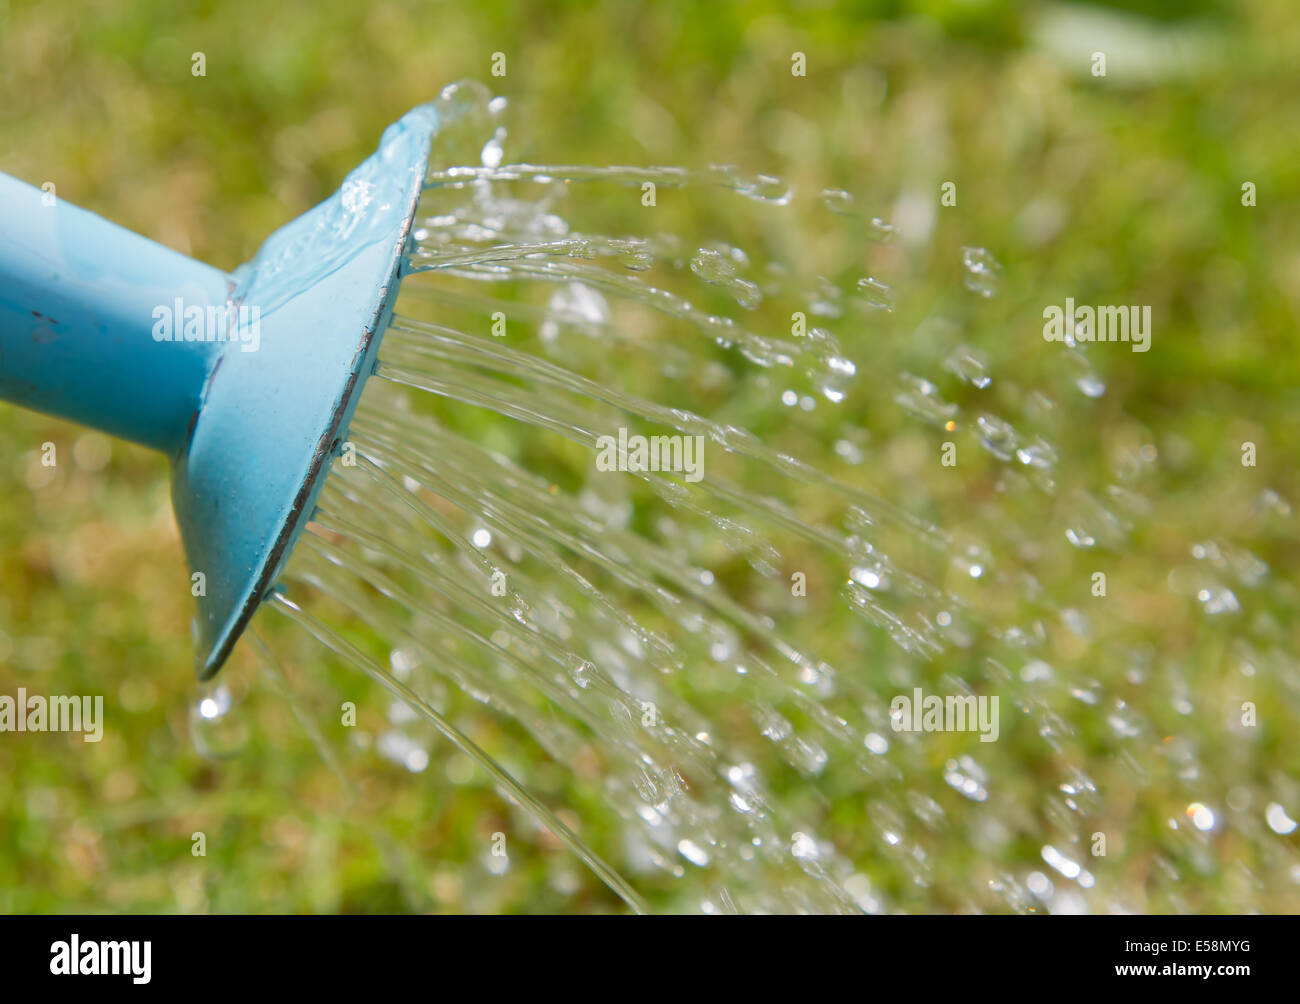 Water pouring from a blue watering can Stock Photo